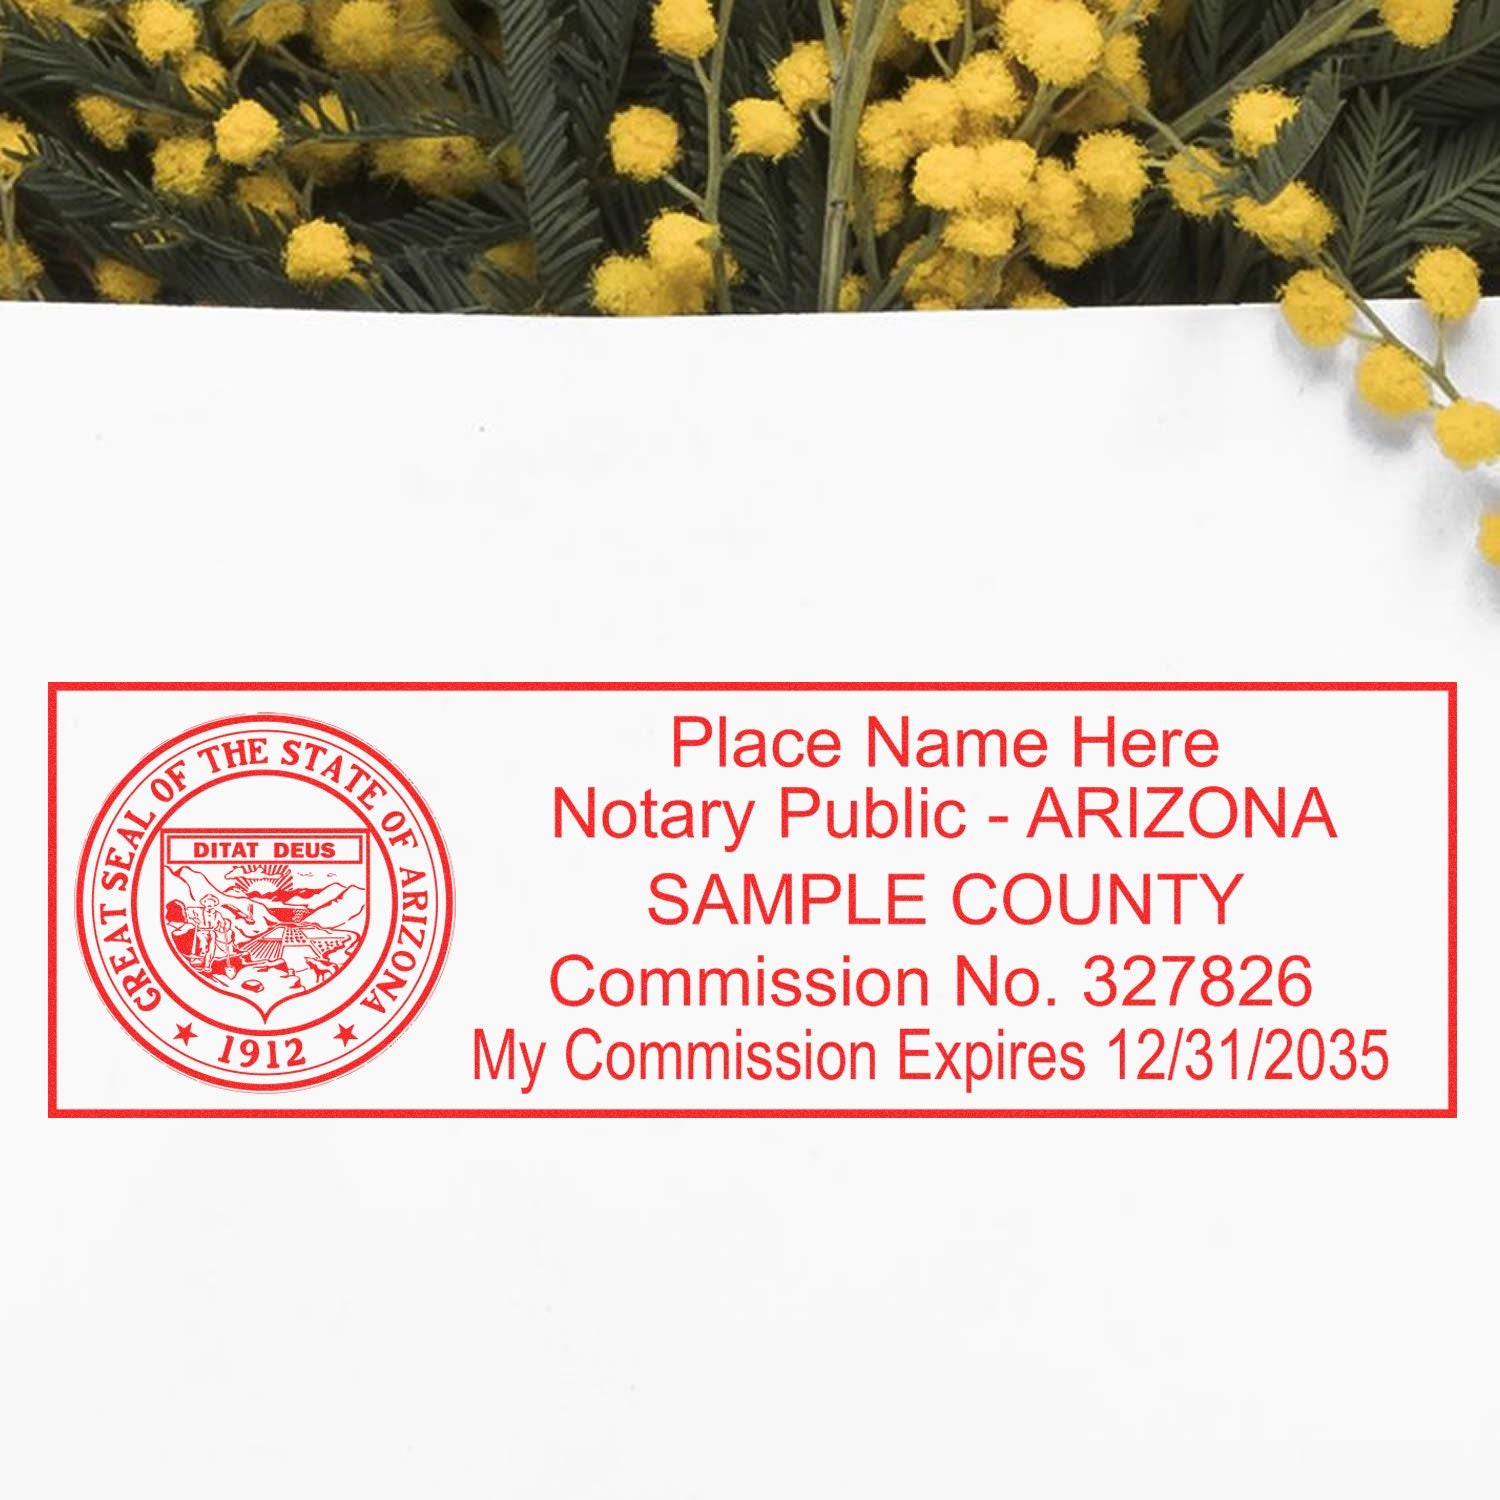 The main image for the PSI Arizona Notary Stamp depicting a sample of the imprint and electronic files